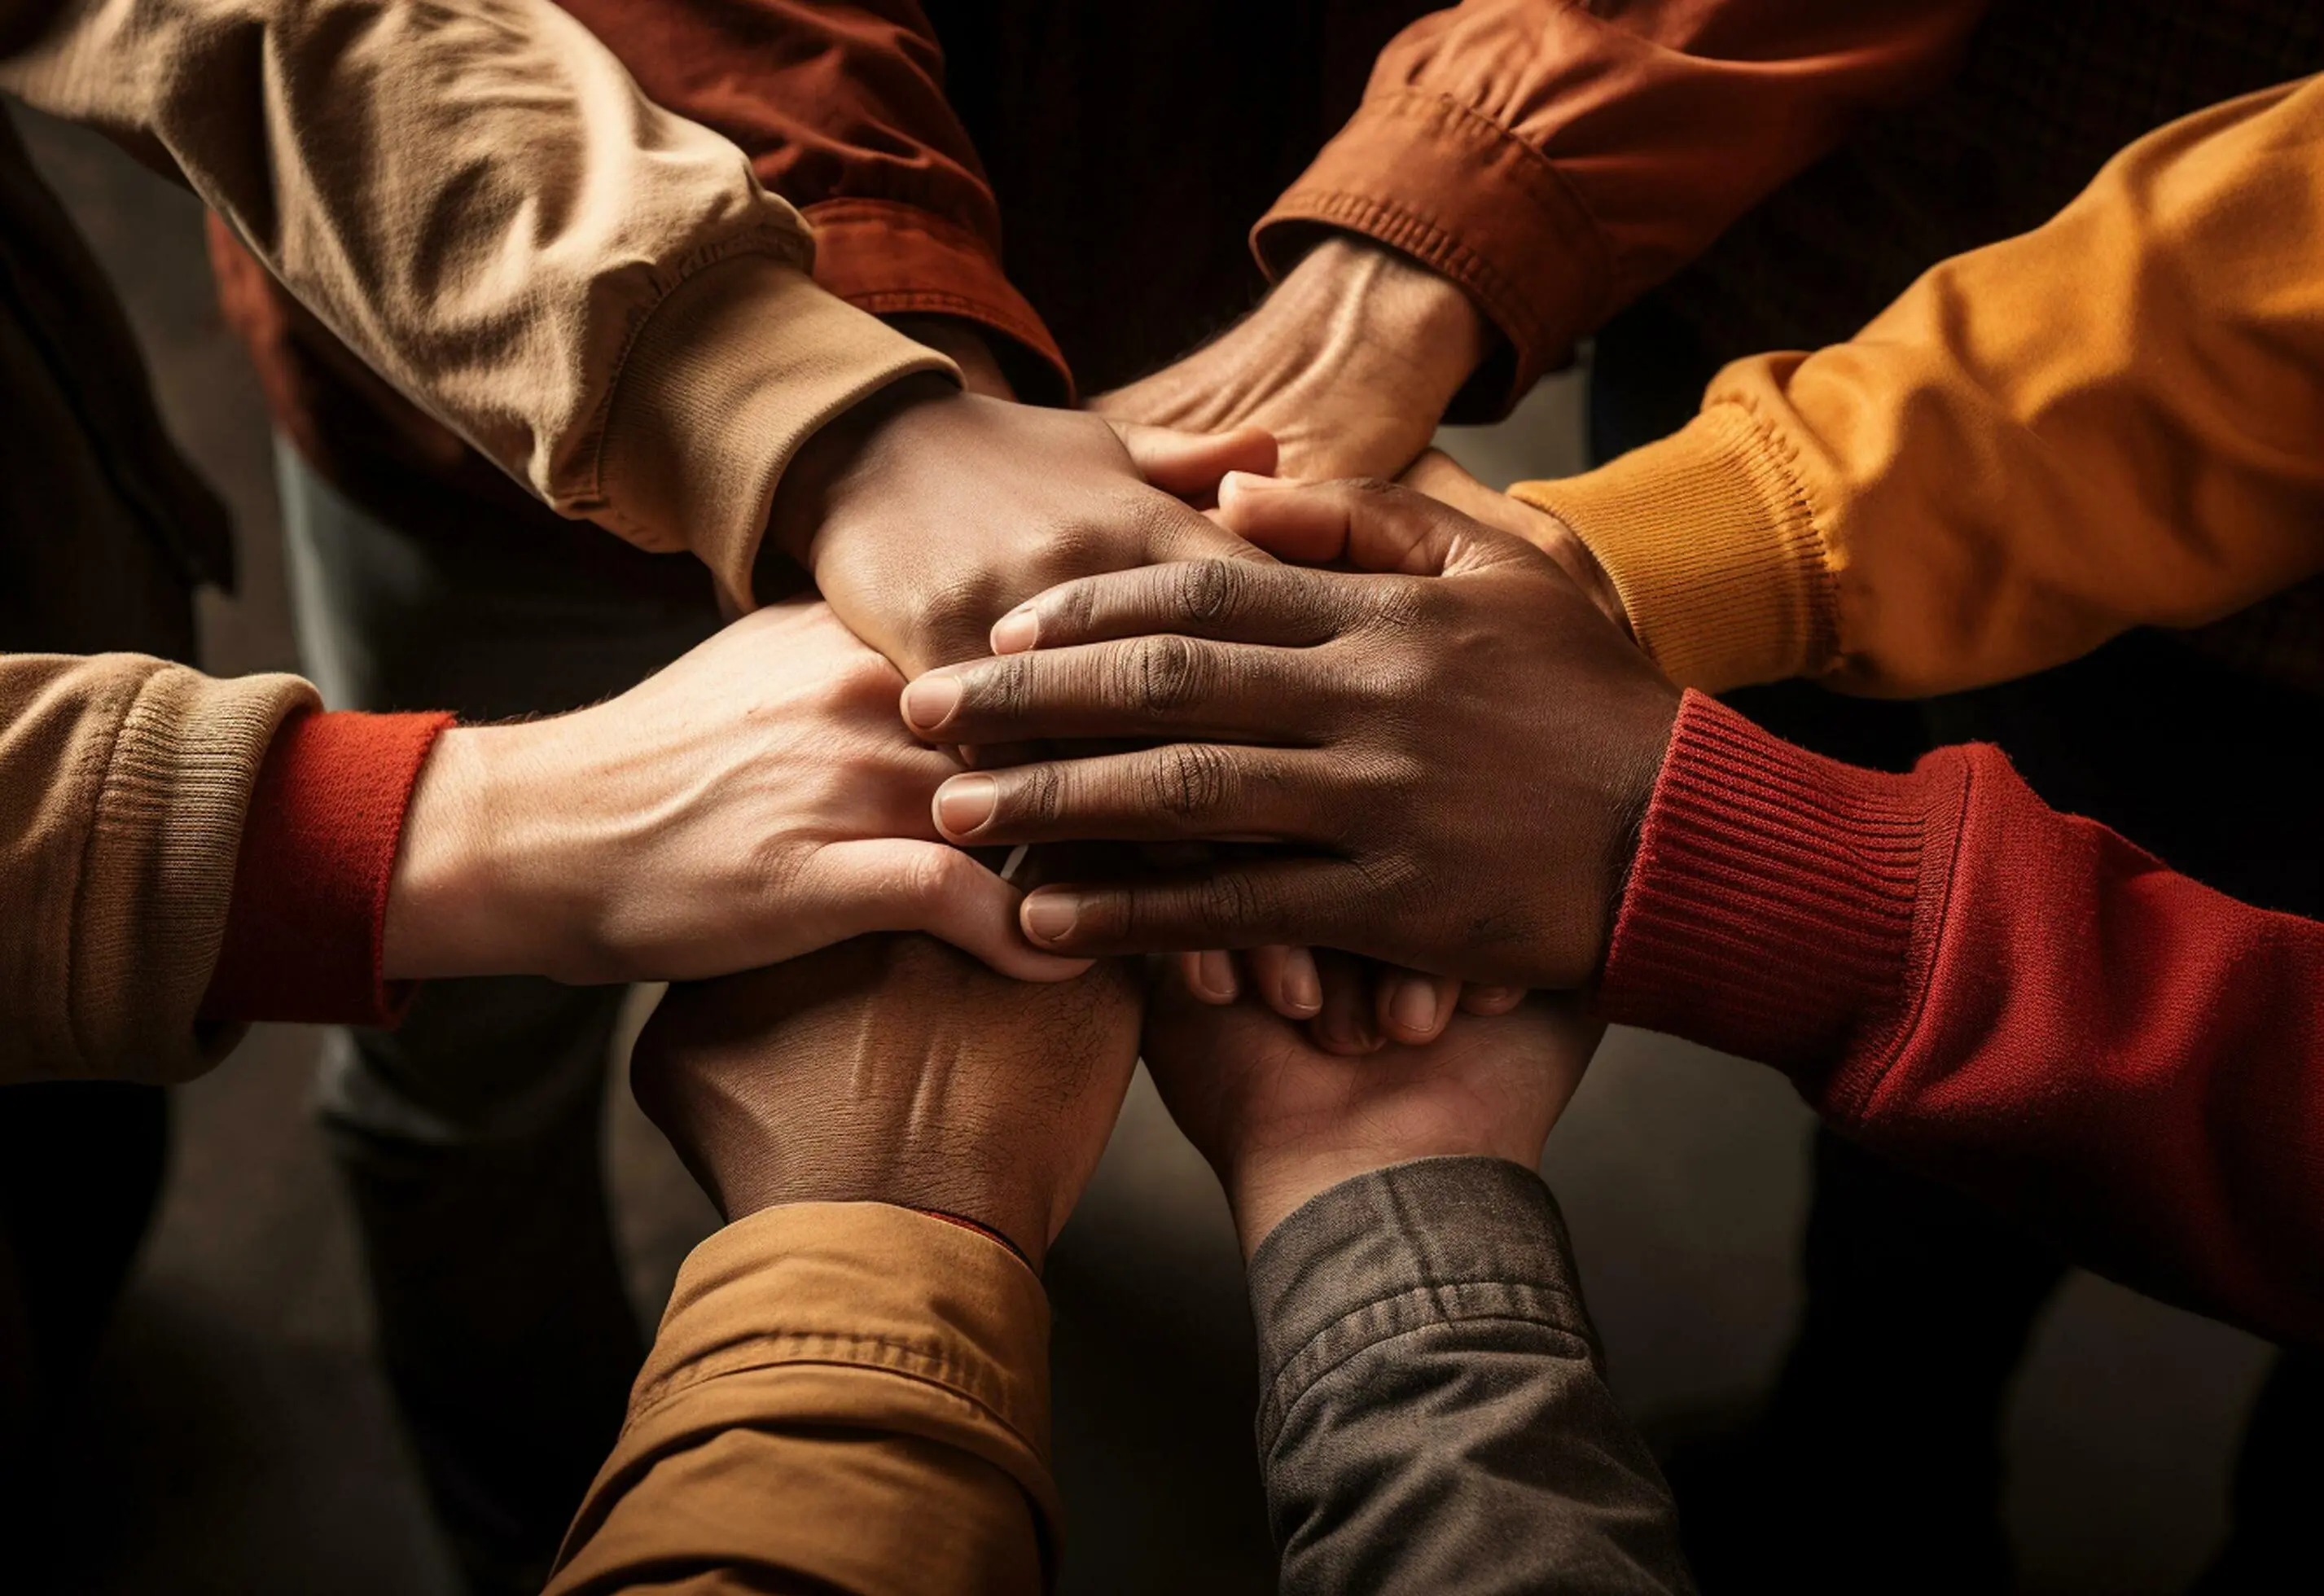 solidarity-unite-people-hands-together-community-teamwork-realistic-image-ultra-hd-free-photo